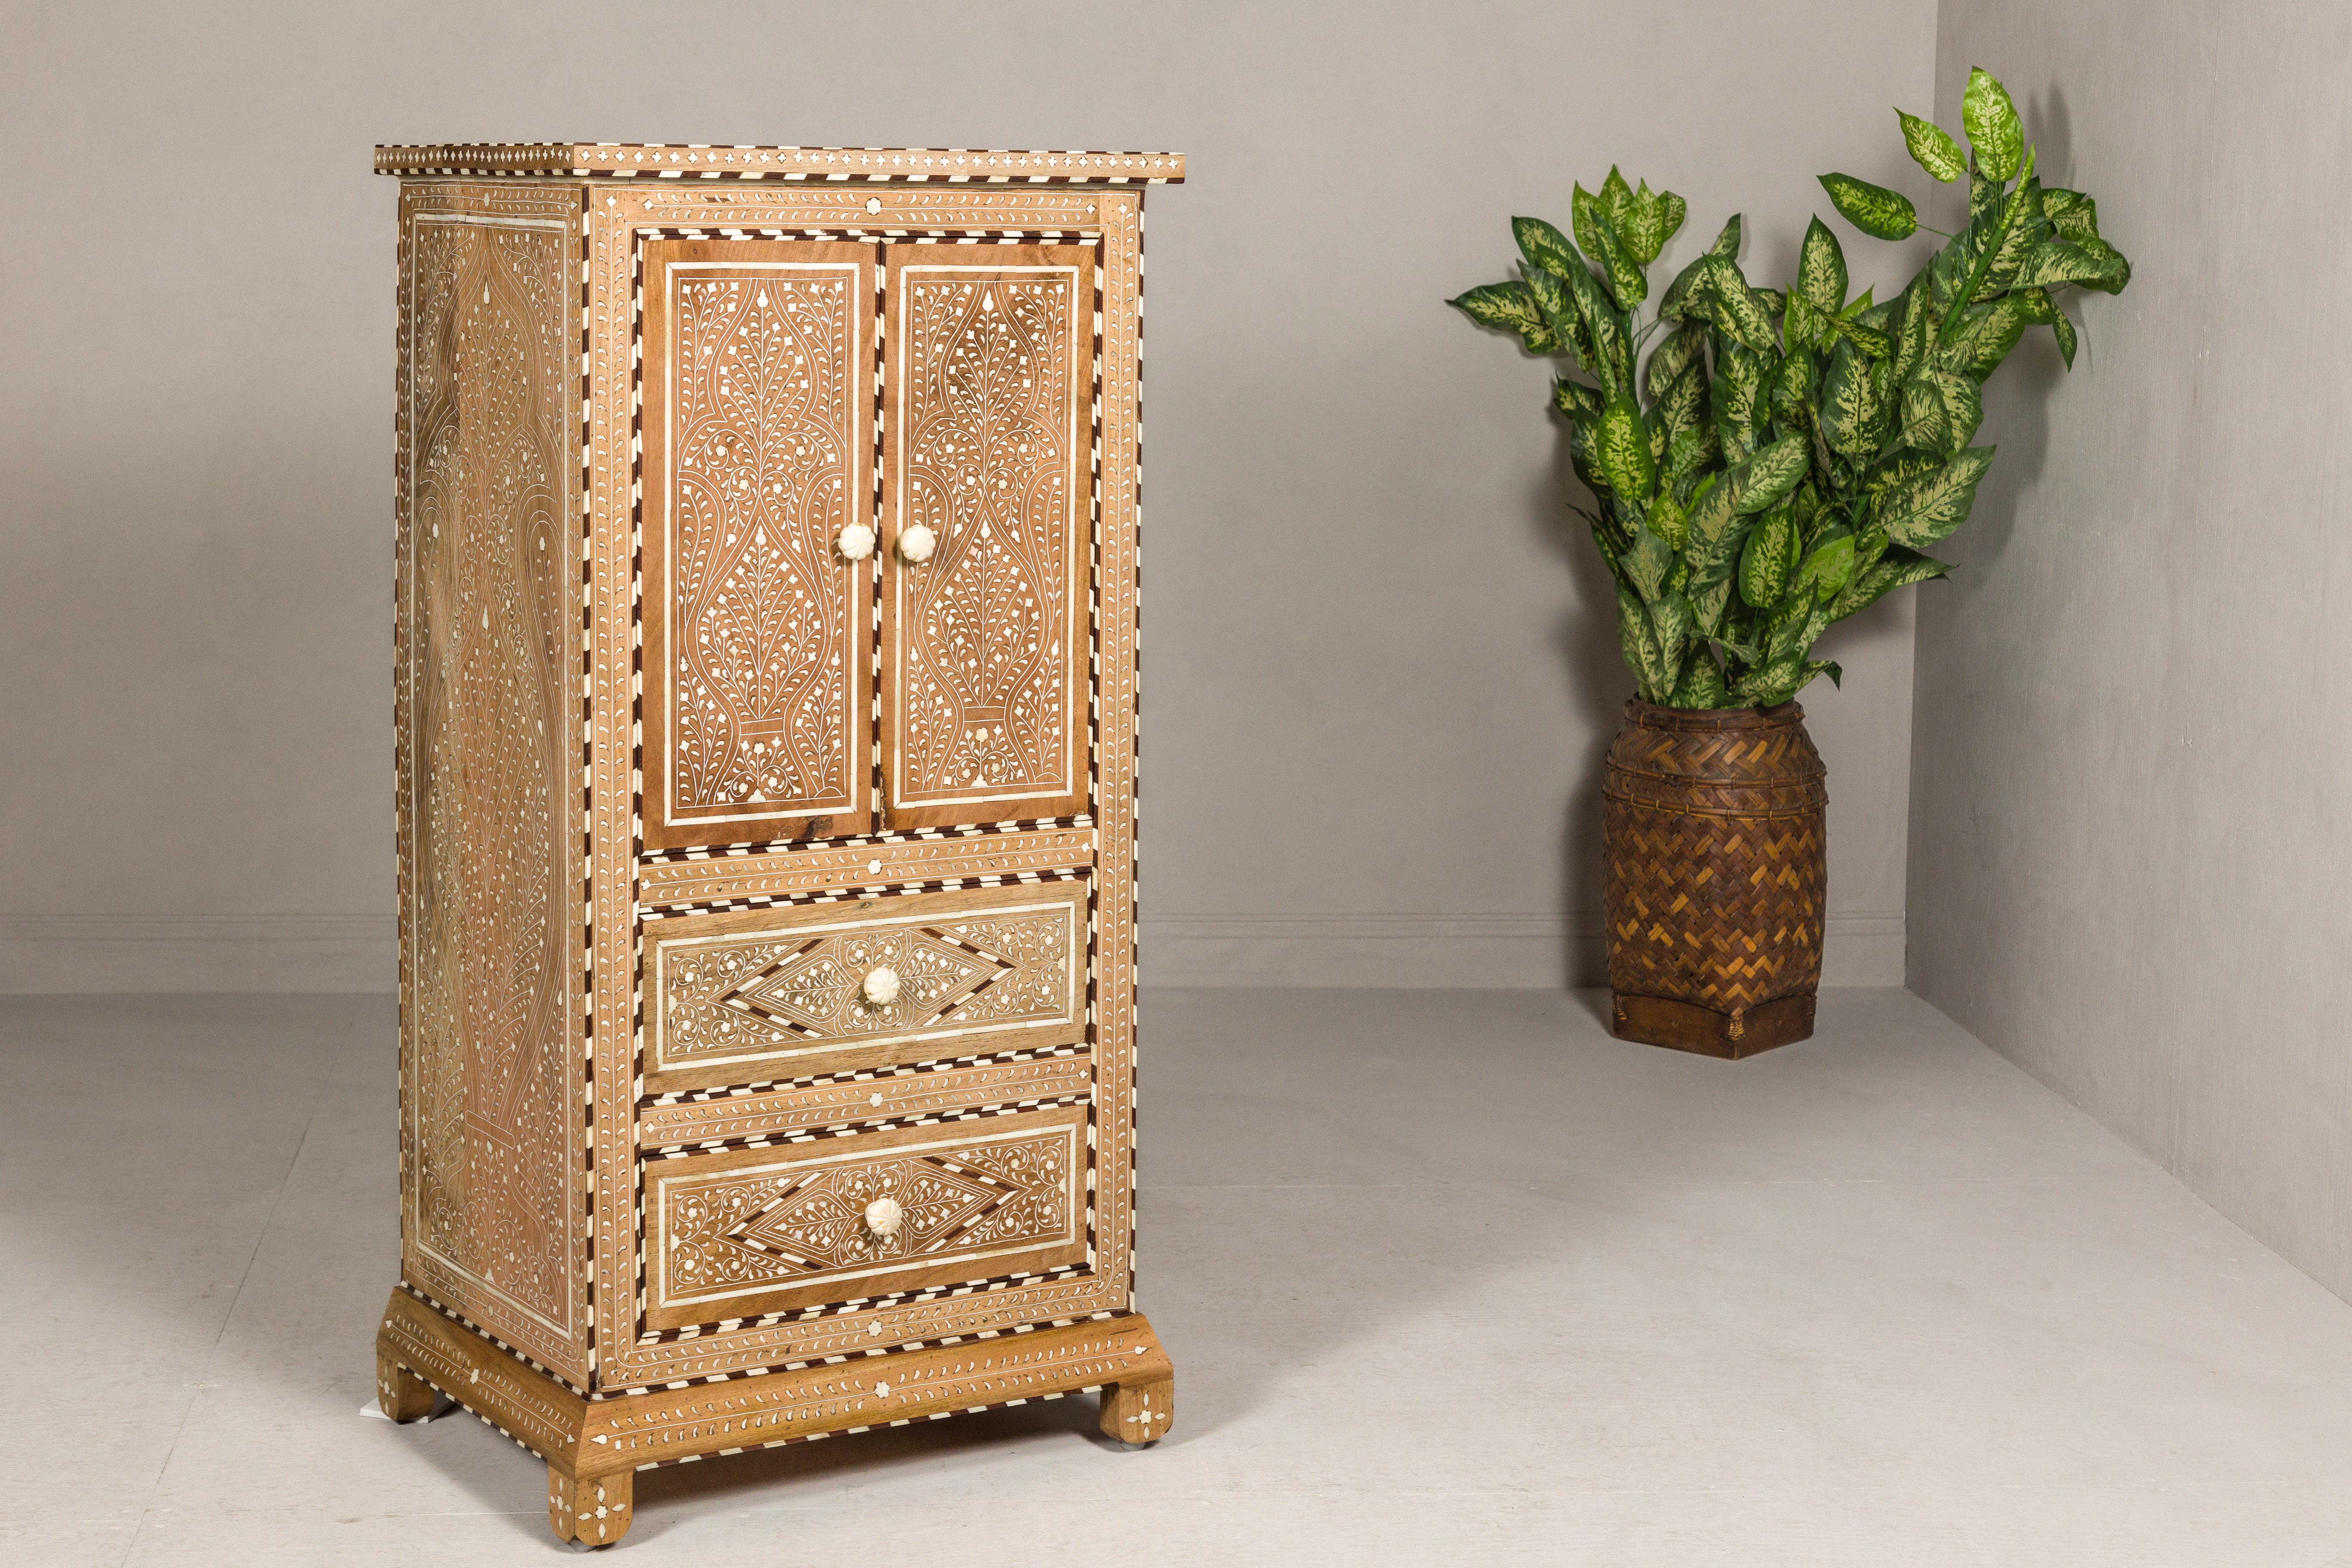 Anglo Indian Style Narrow Cabinet with Foliage-Themed Bone Inlaid Décor For Sale 5